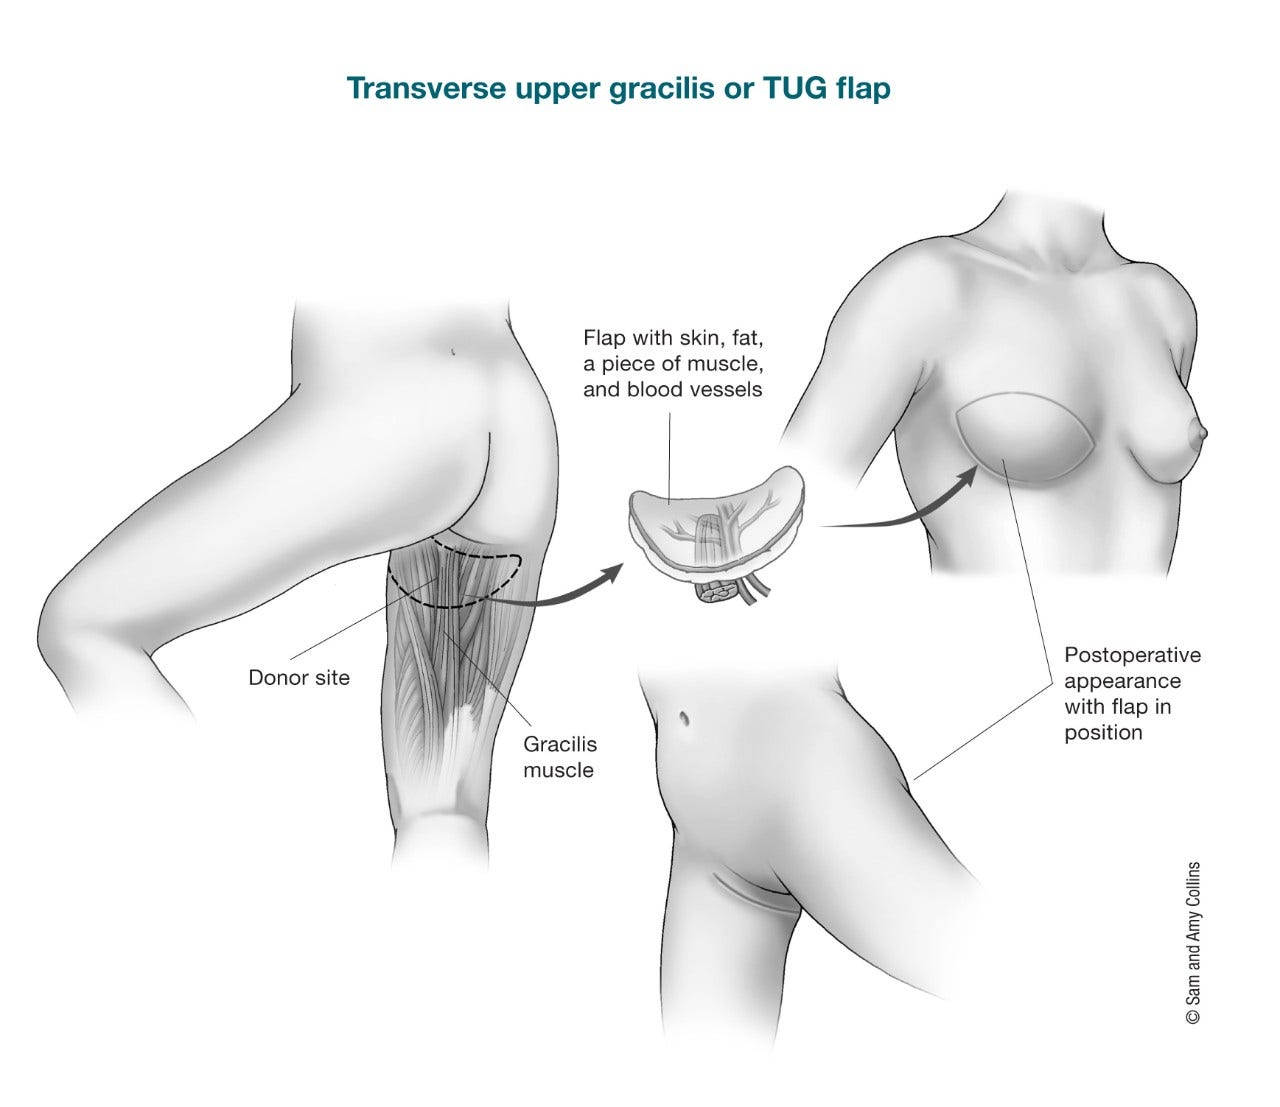 Stage C Autologous Breast Reconstruction – Medical Stock Images Company